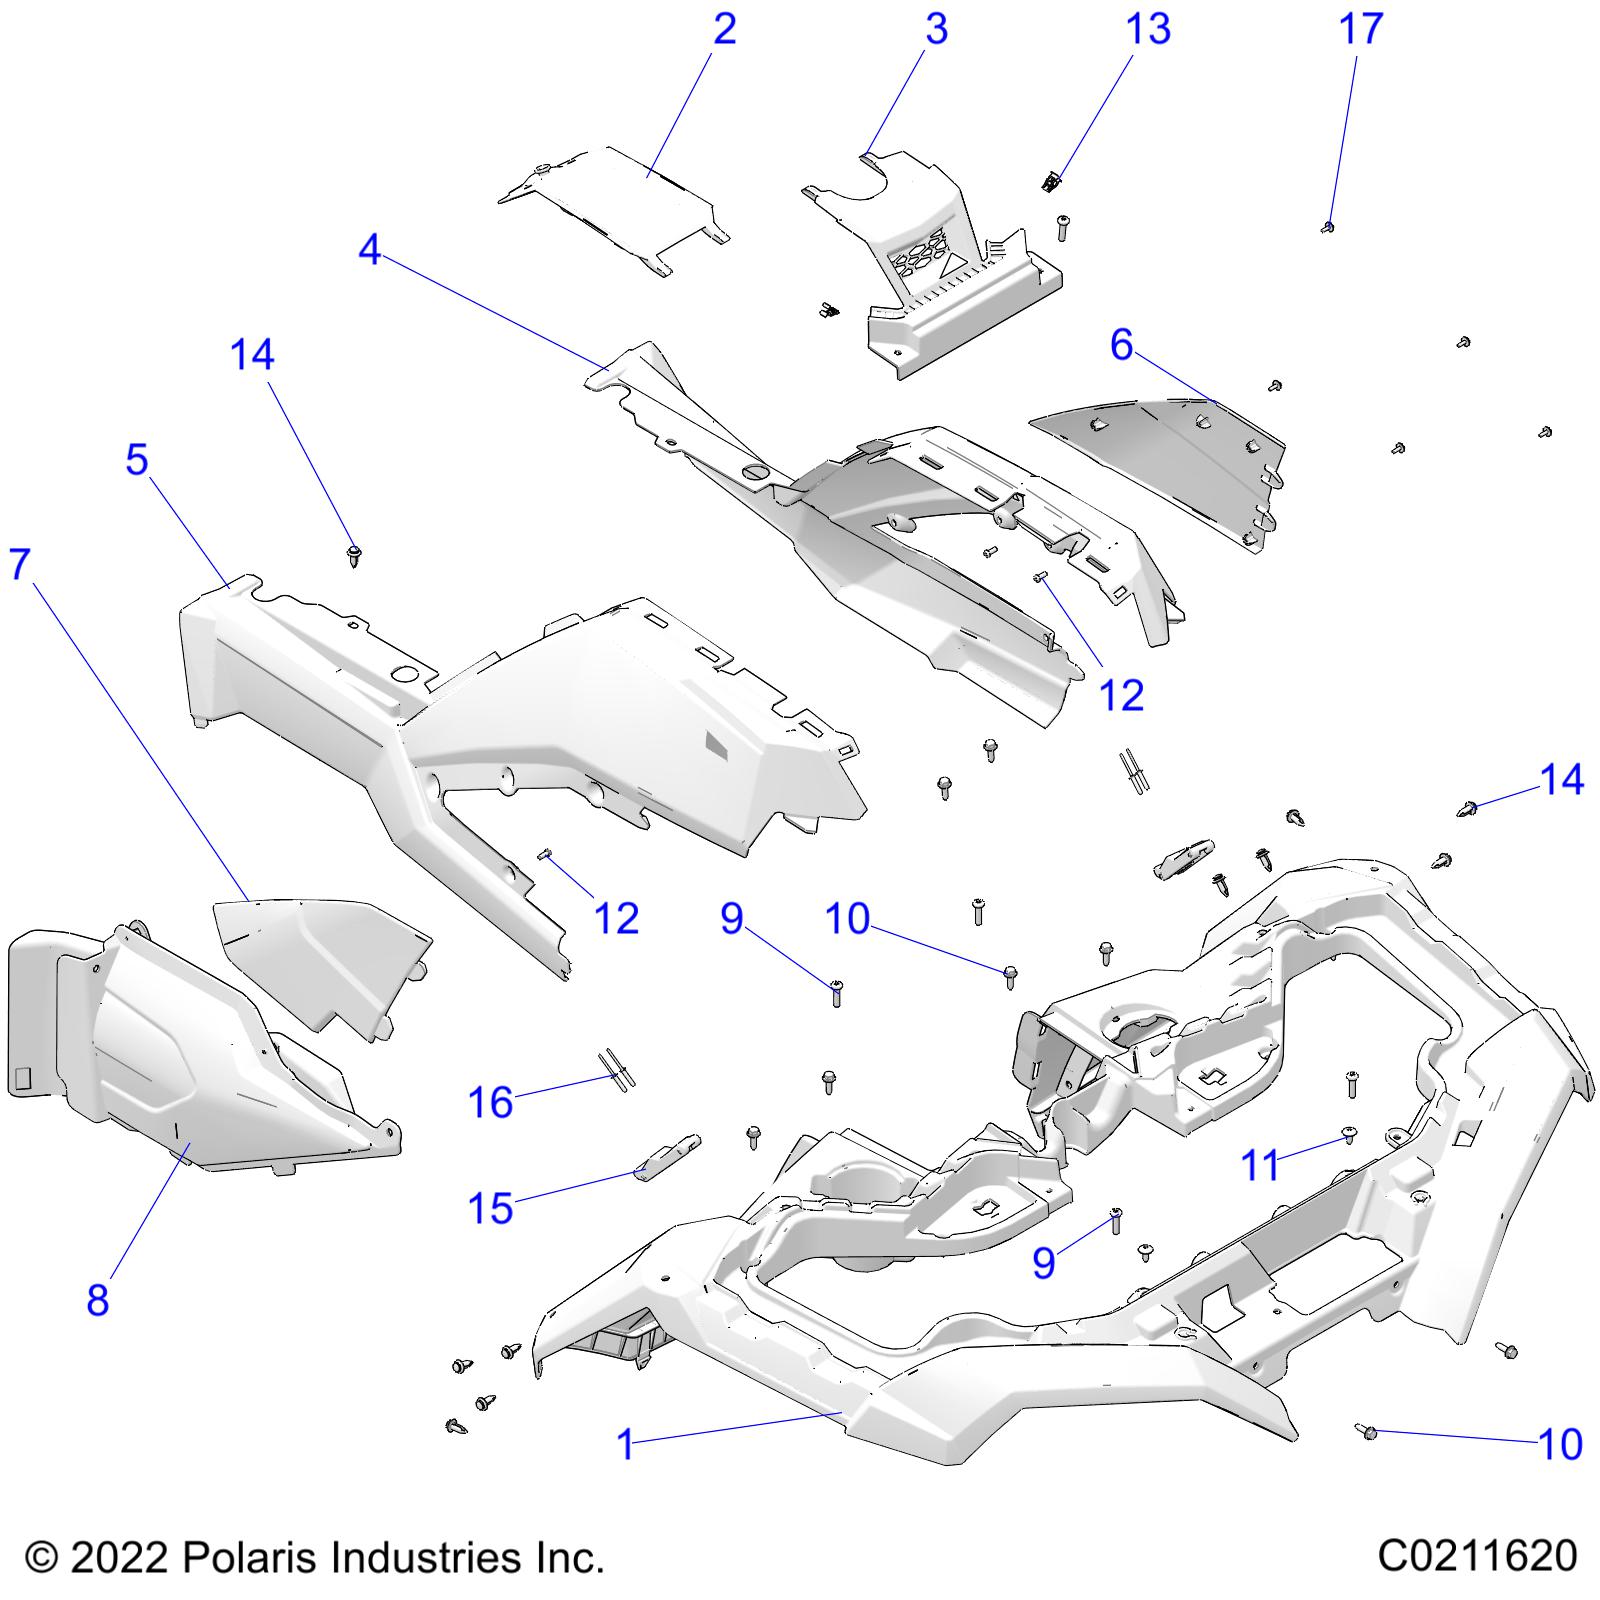 Part Number : 2636150 EXHAUST SHIELD COVER ASSEMBLY